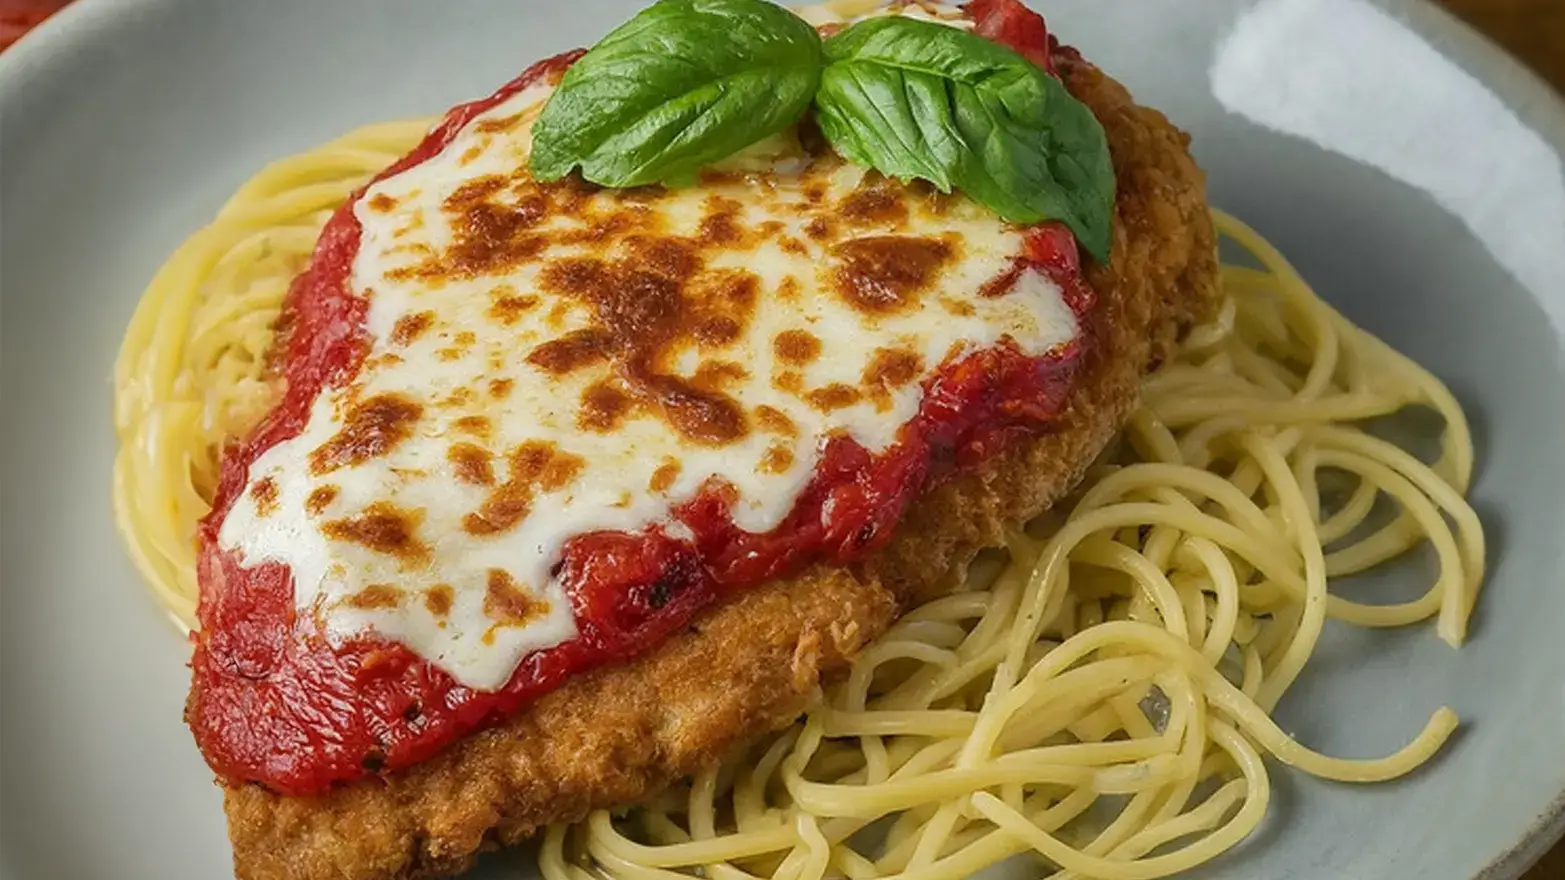 Chicken parm on bed of pasta